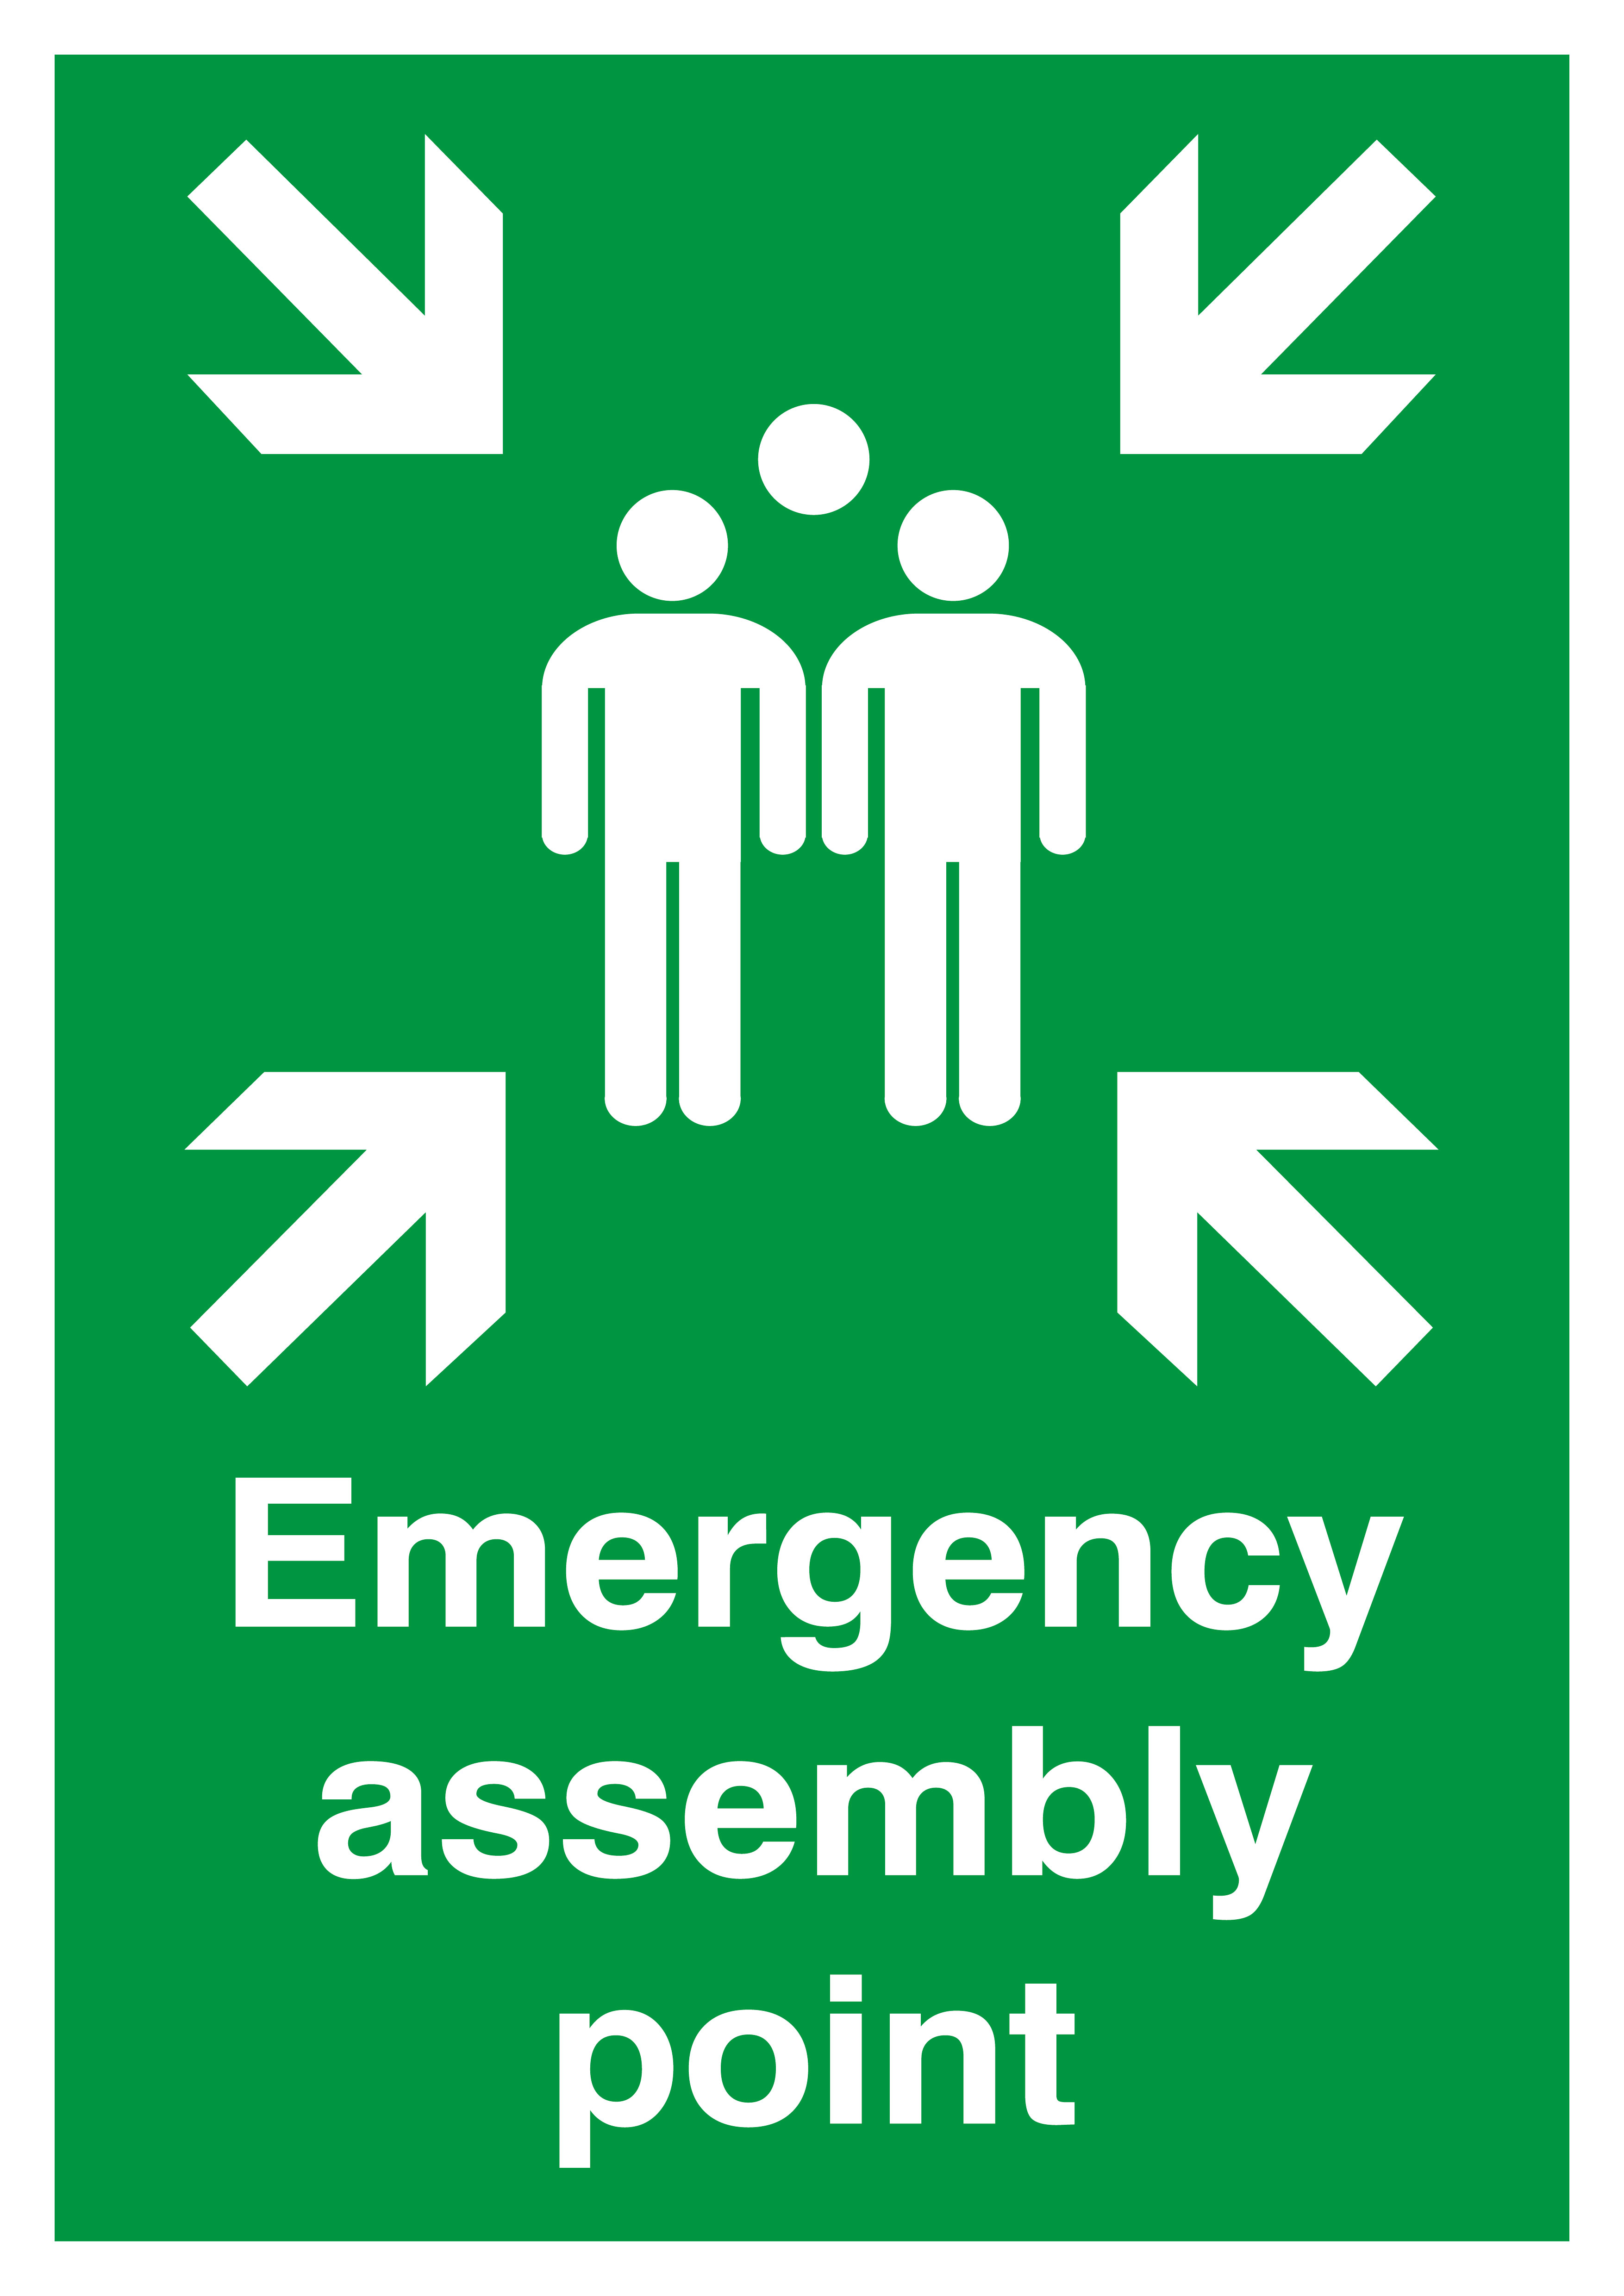 600x400mm Emergency assembly point Sign, 1mm Rigid Plastic